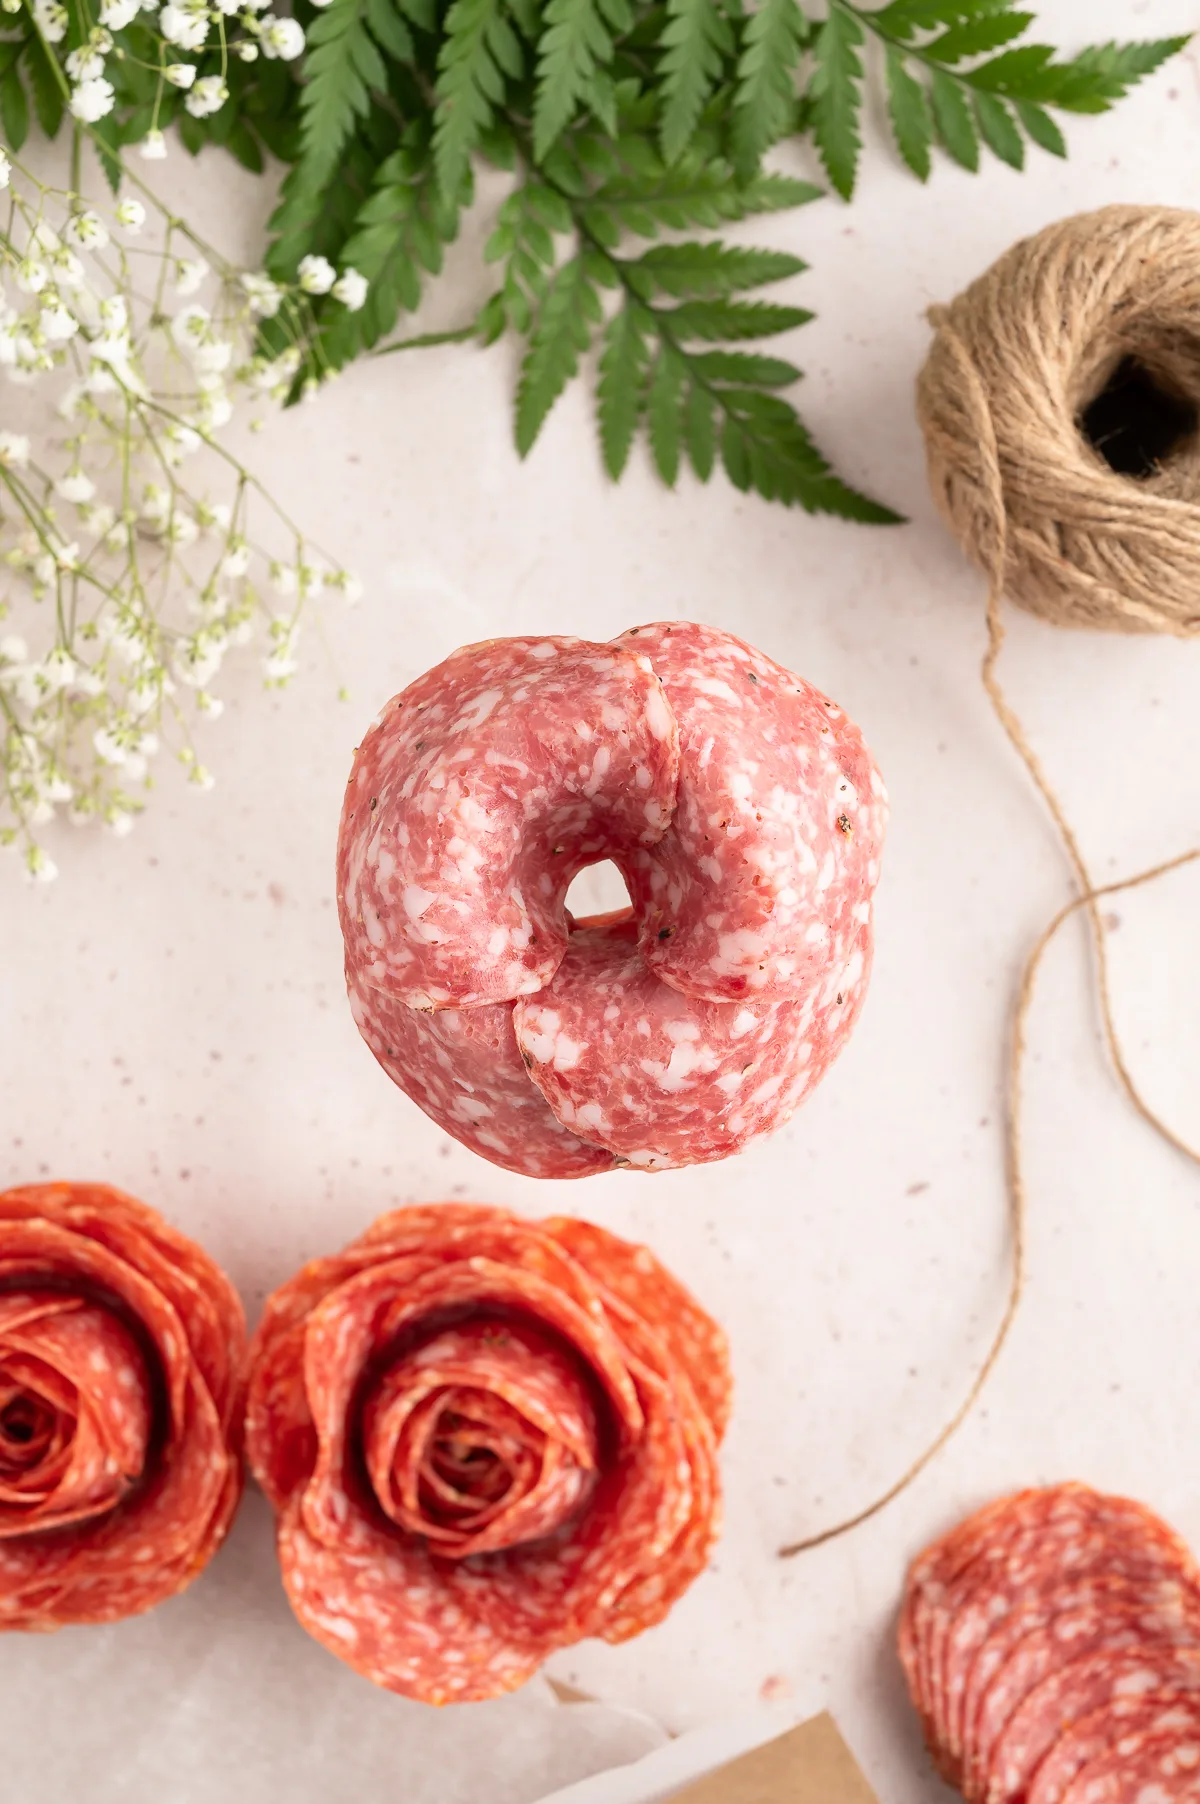 showing how to make a salami rose using a glass